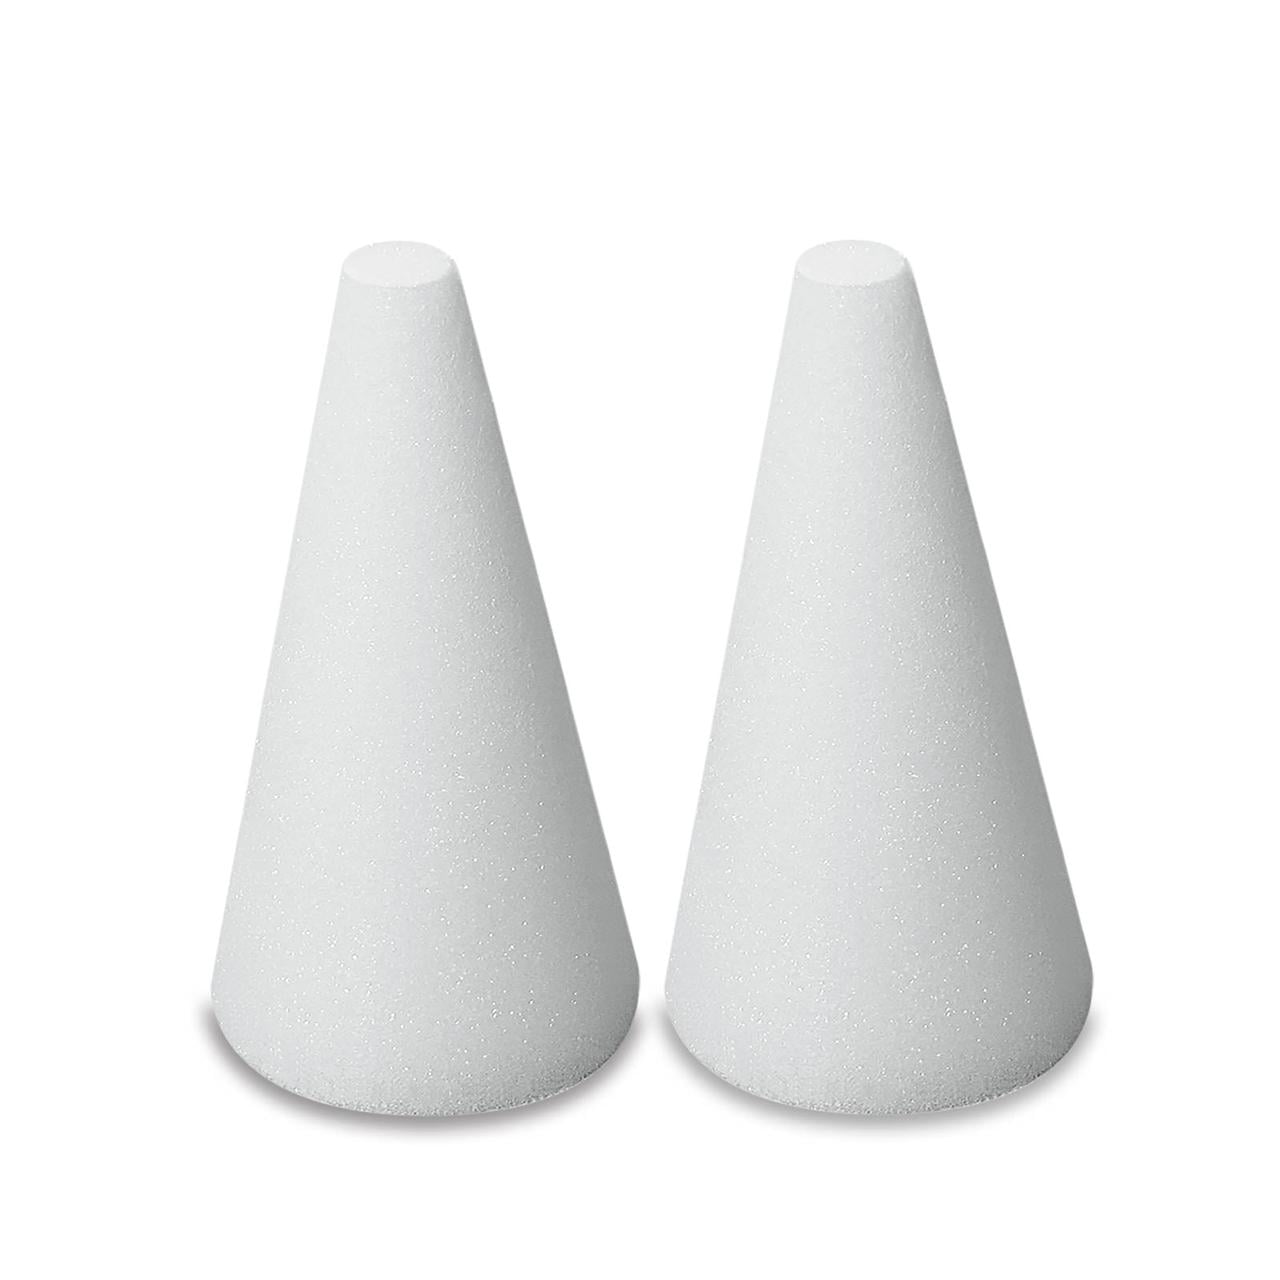 White Foam Cones for Crafts, 5 Assorted Sizes (2 - 4.5 In, 18 Pack), PACK -  Kroger